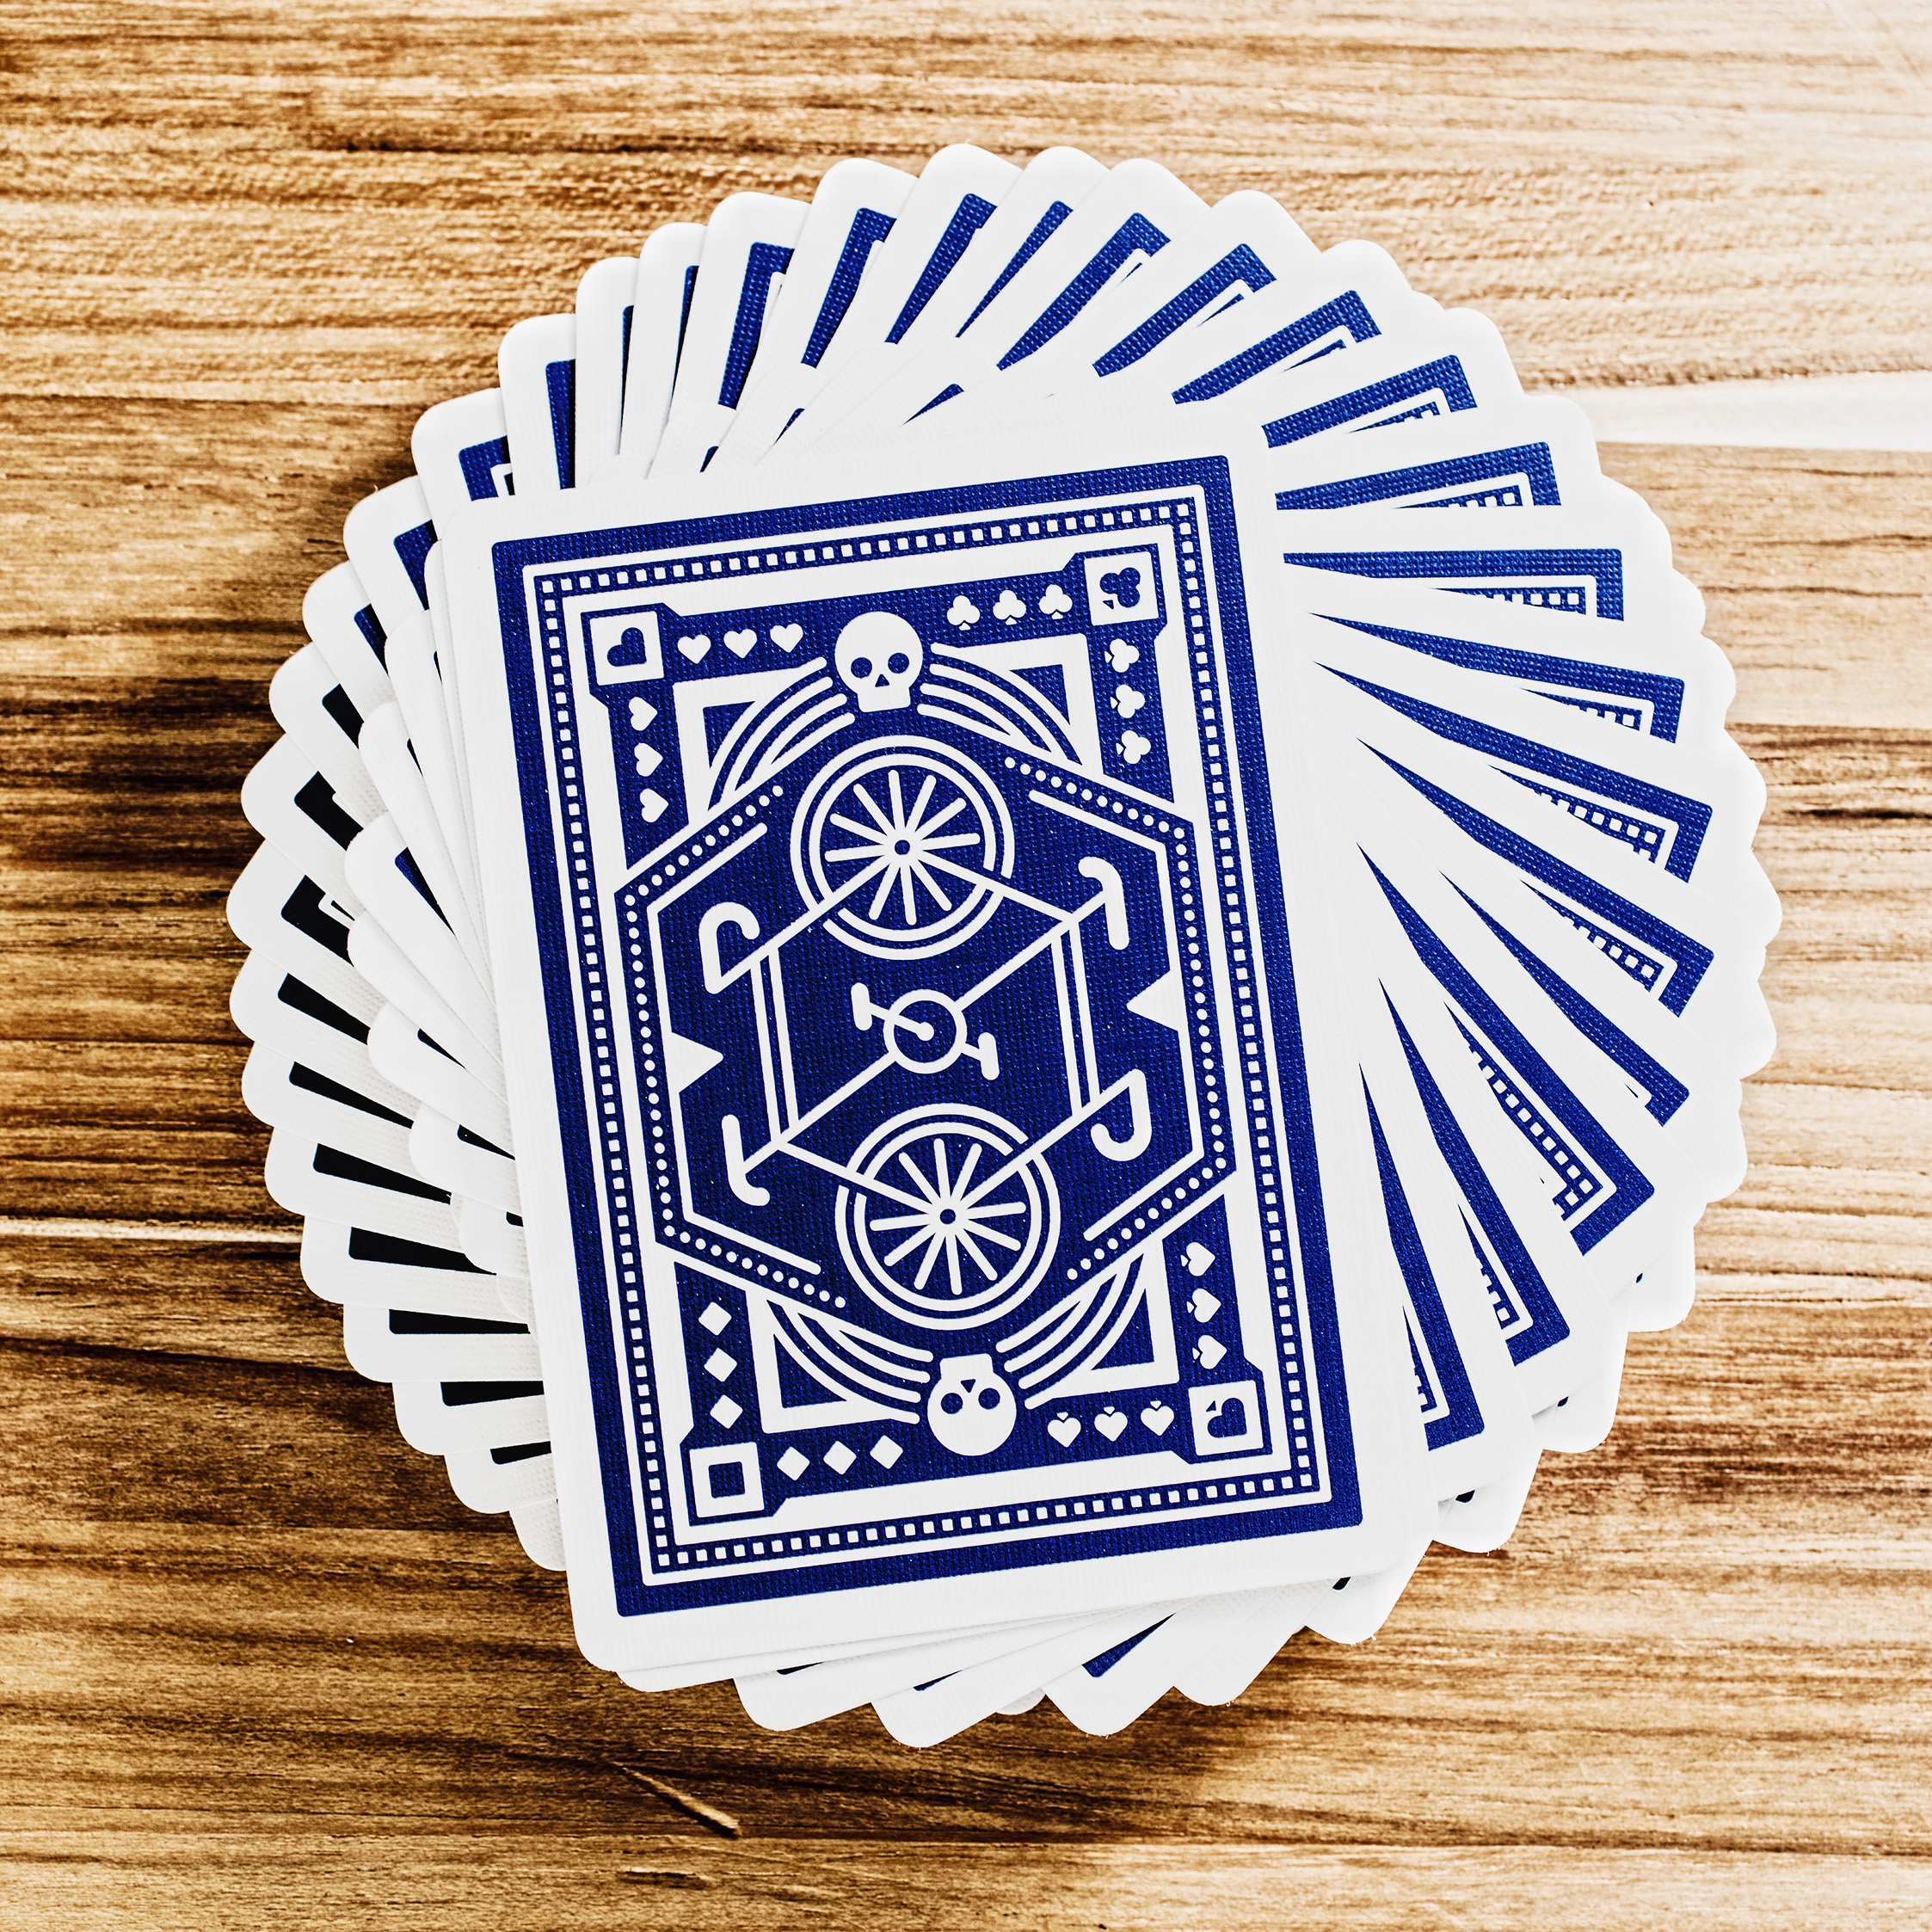 Blue Wheel Playing cards 54 custom illustrated cards by DKNG 